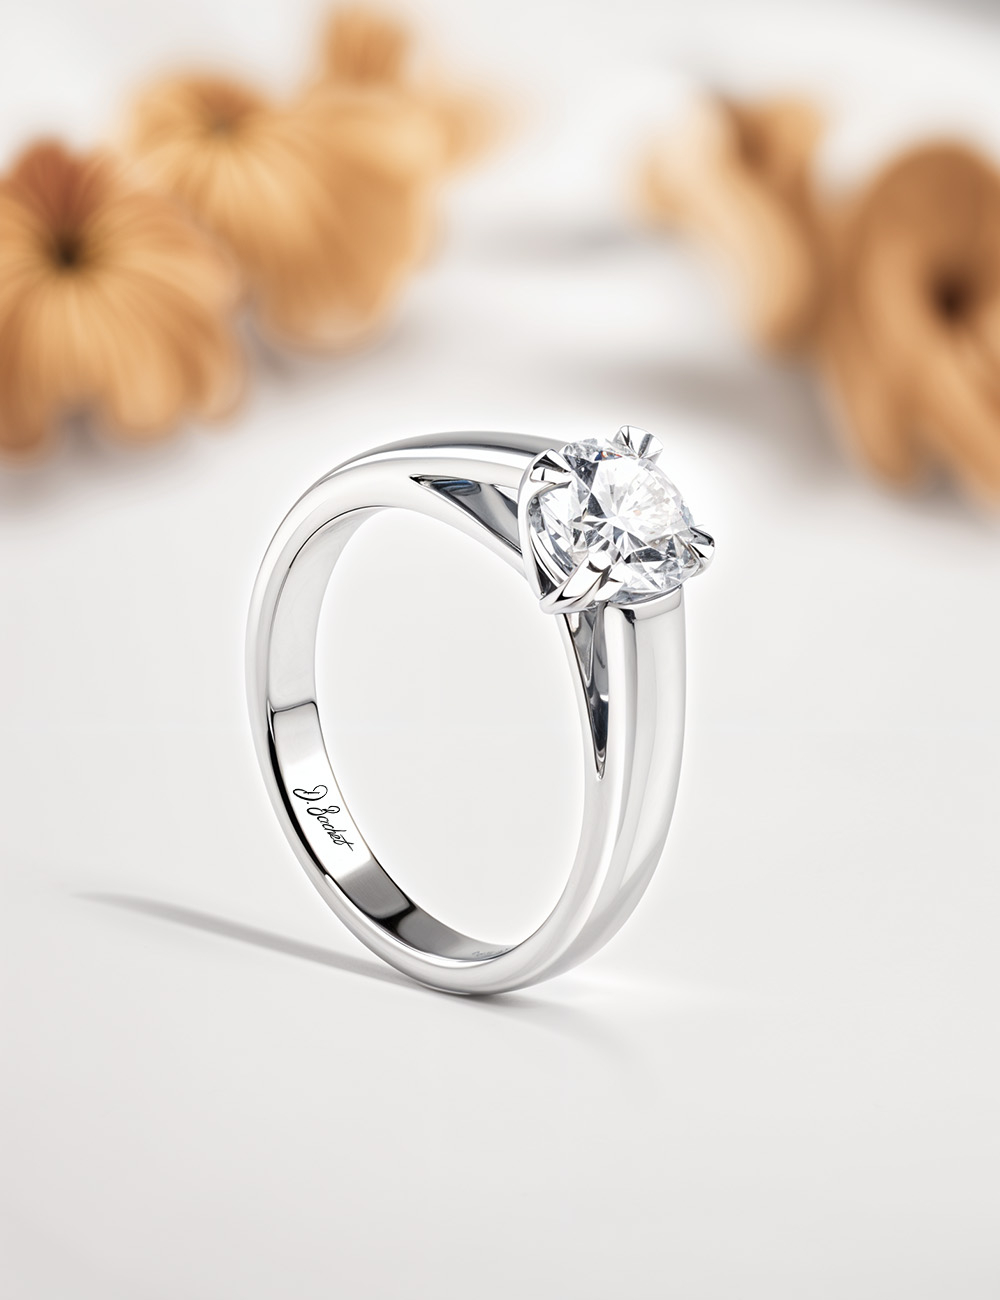 D.Bachet solitaire engagement ring in platinum: 0.50 carat white diamond, sleek contemporary setting, ethically sourced.